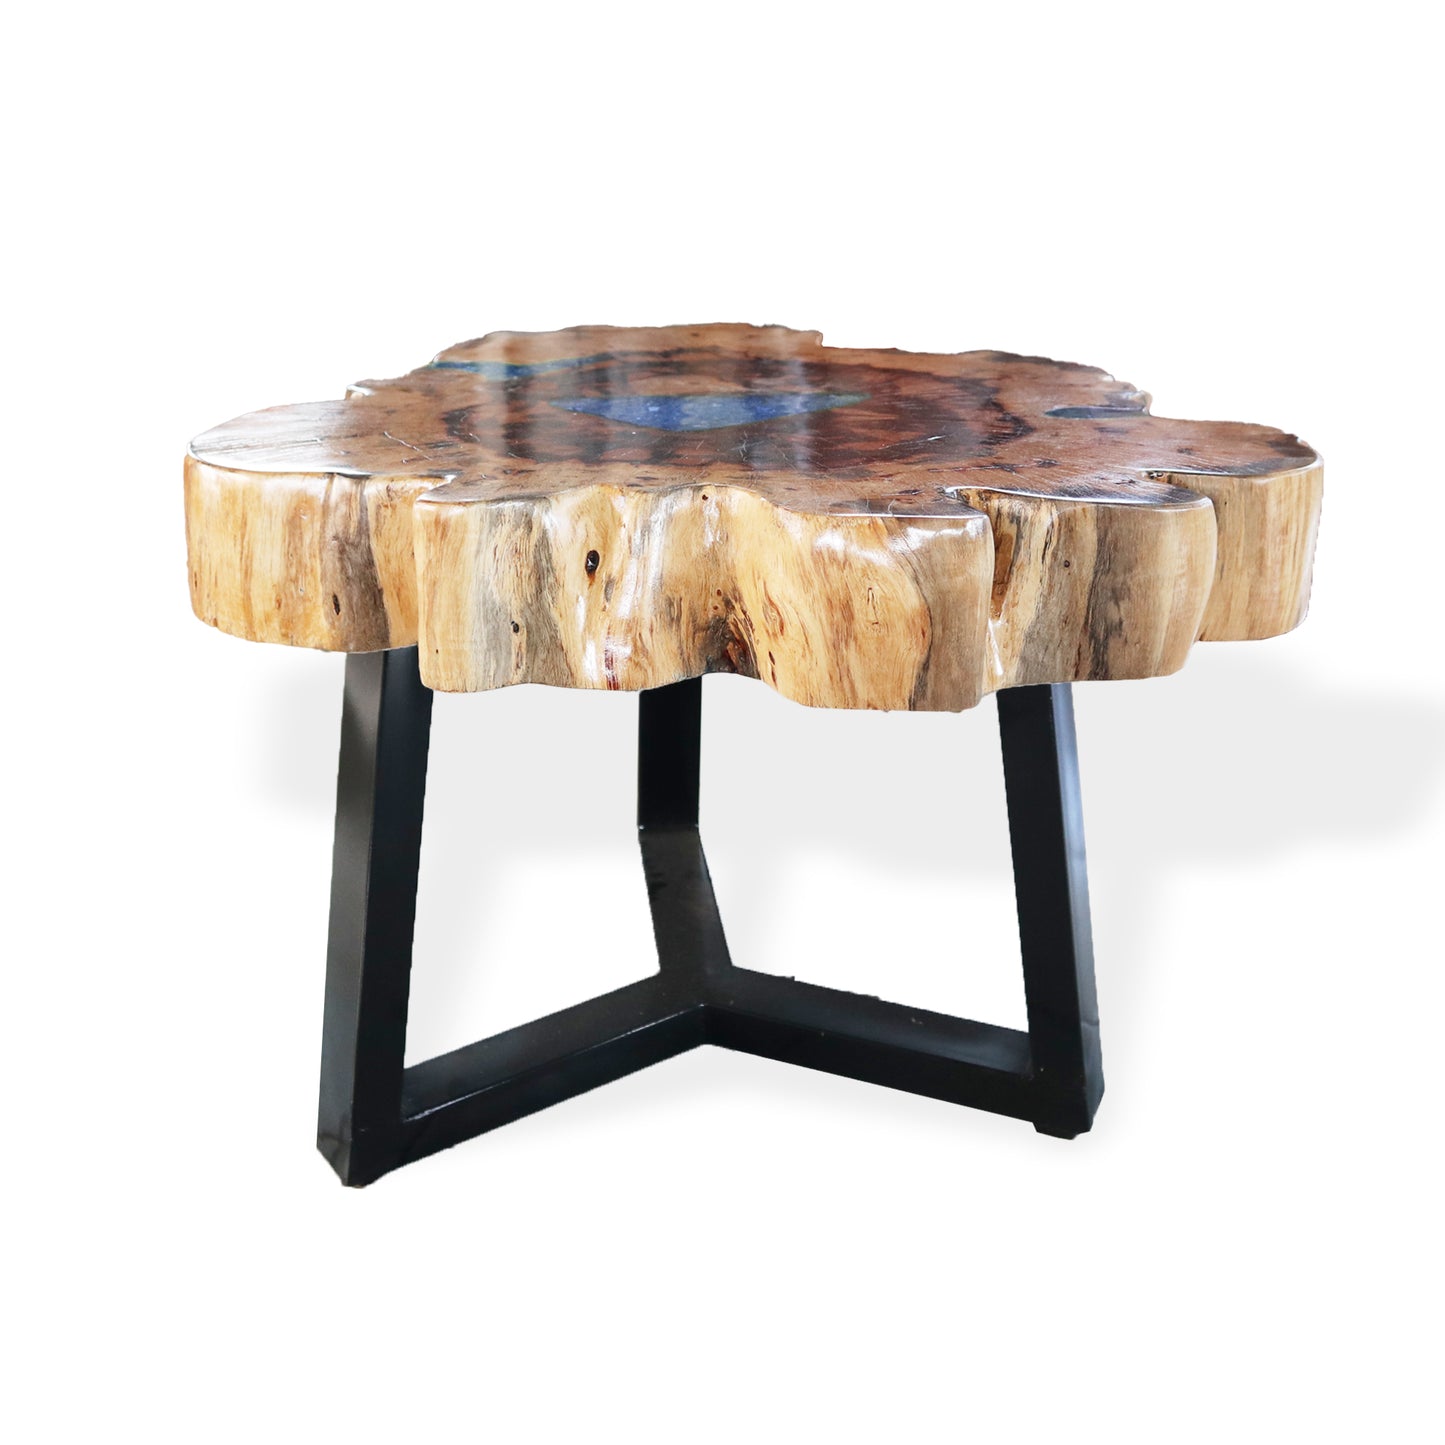 Tamarind and Resin Coffee Table - Sky Blue